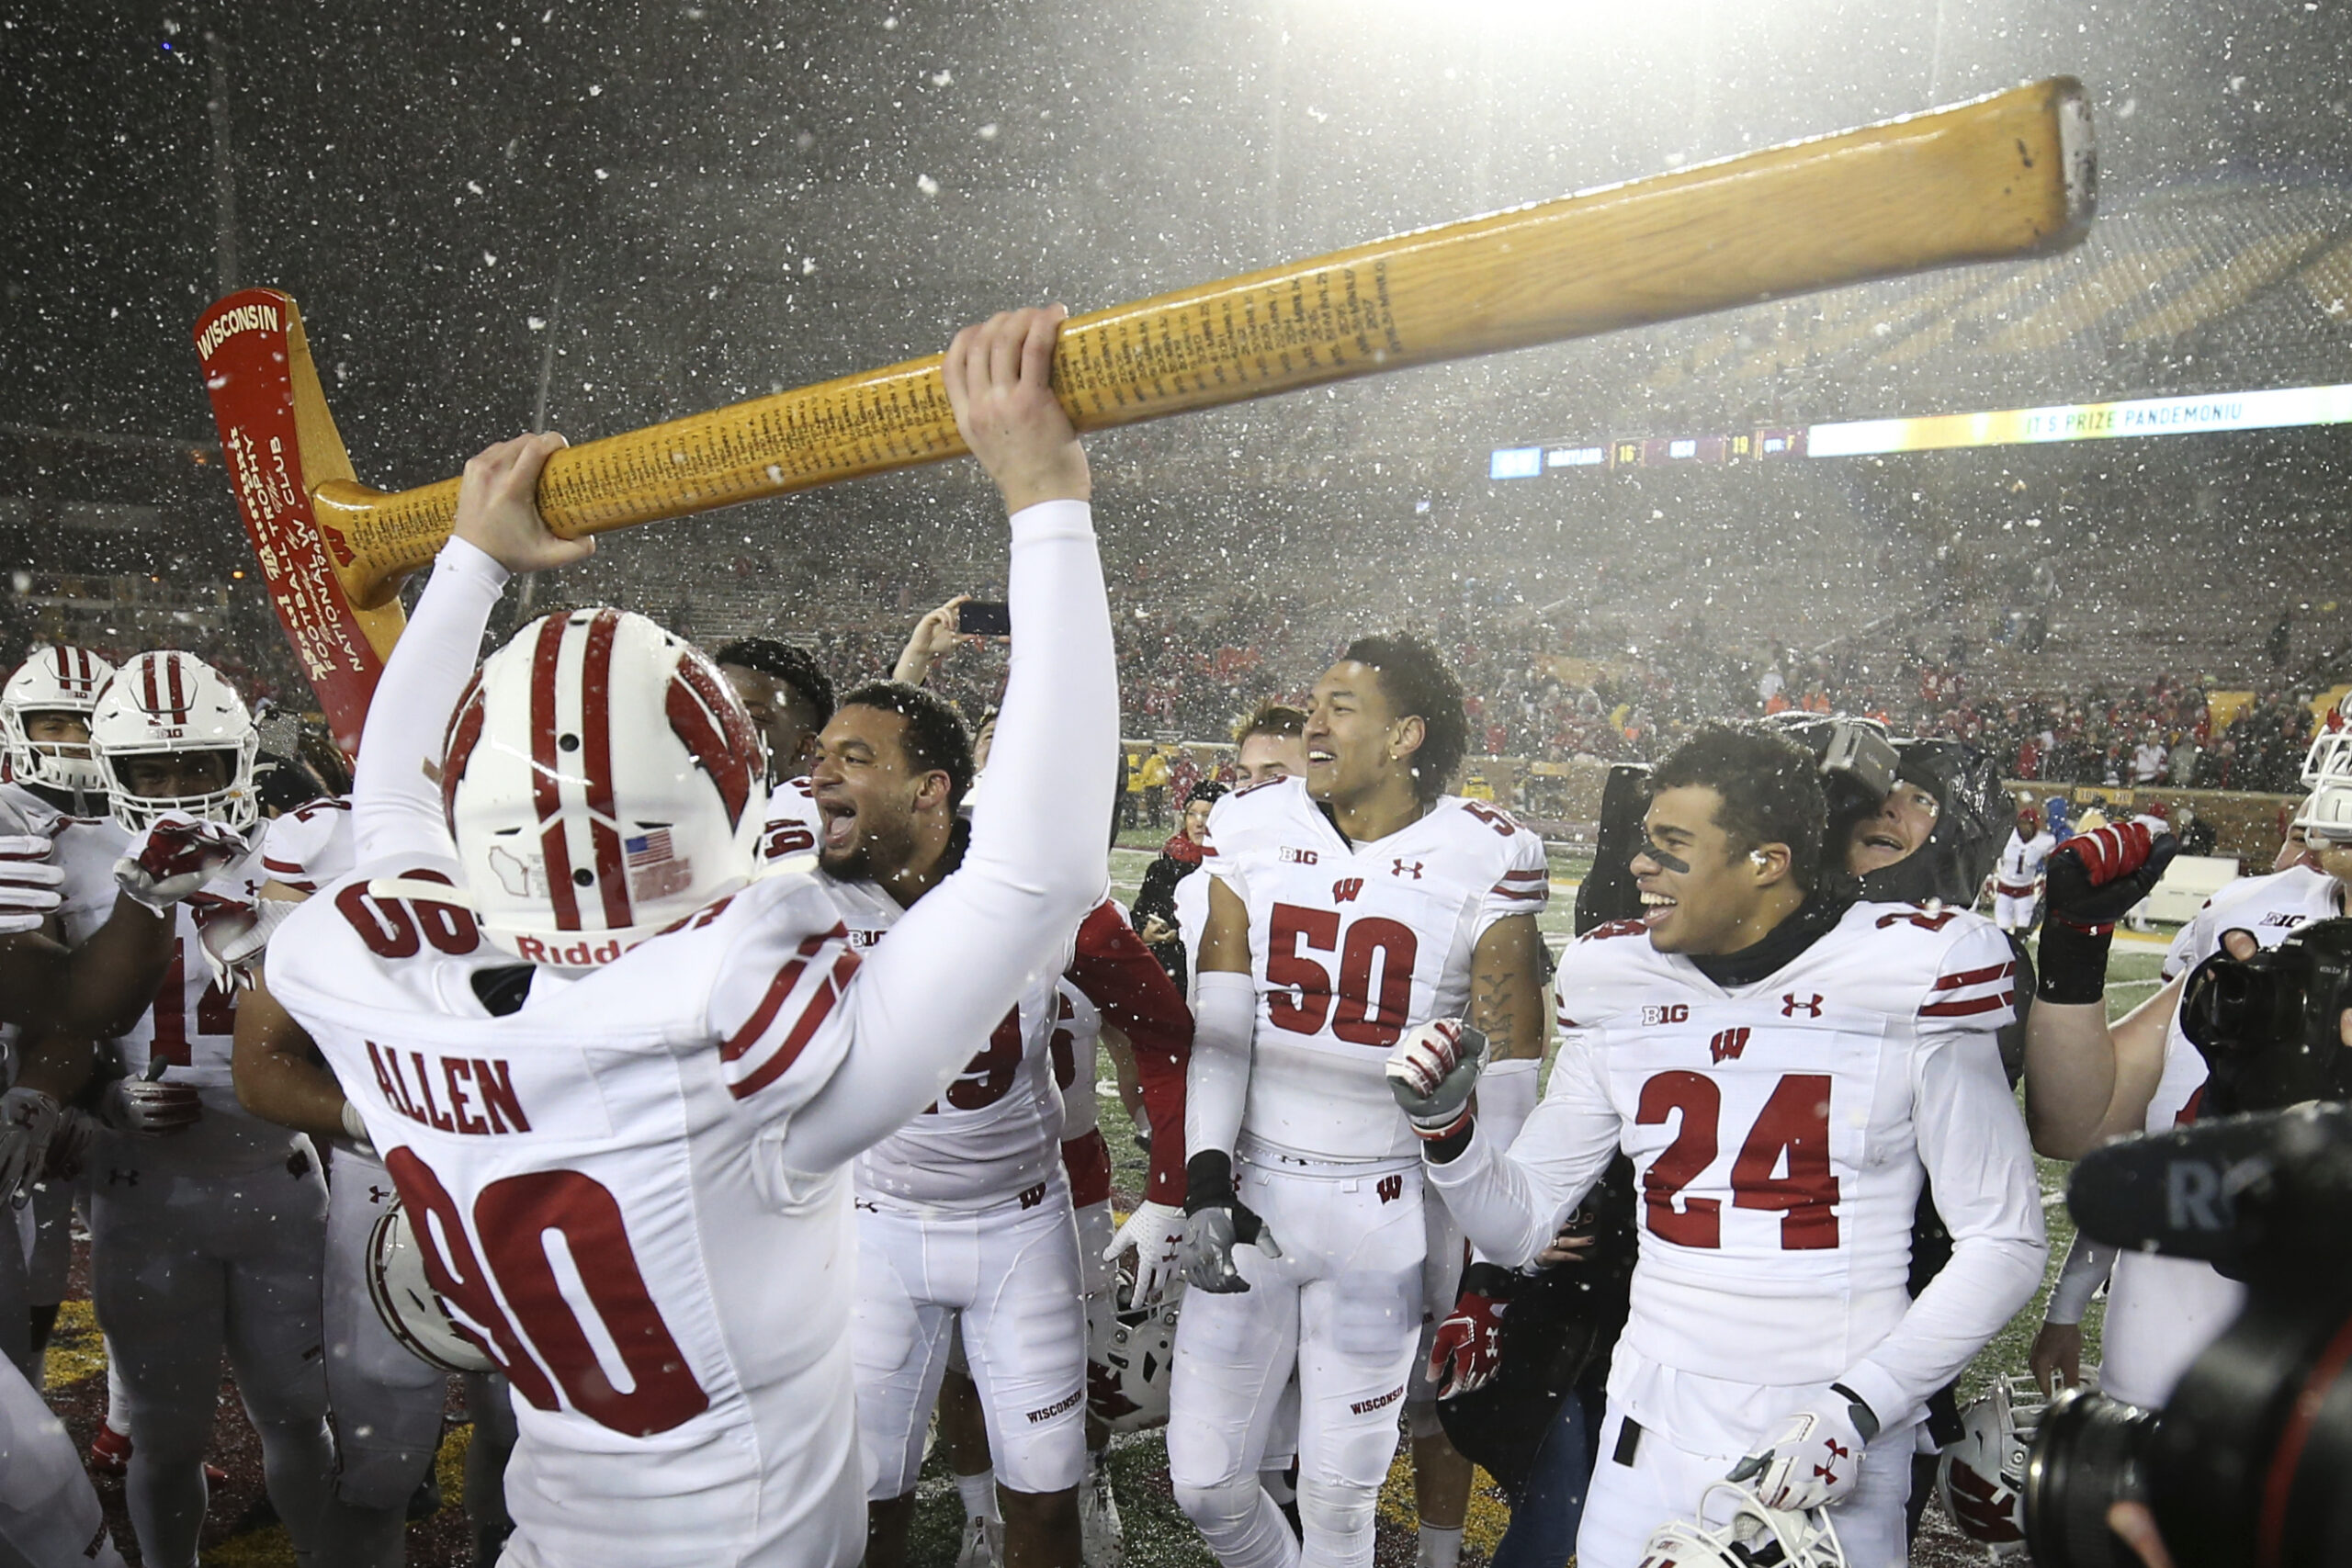 Axe Game will have big implications for Badgers Saturday